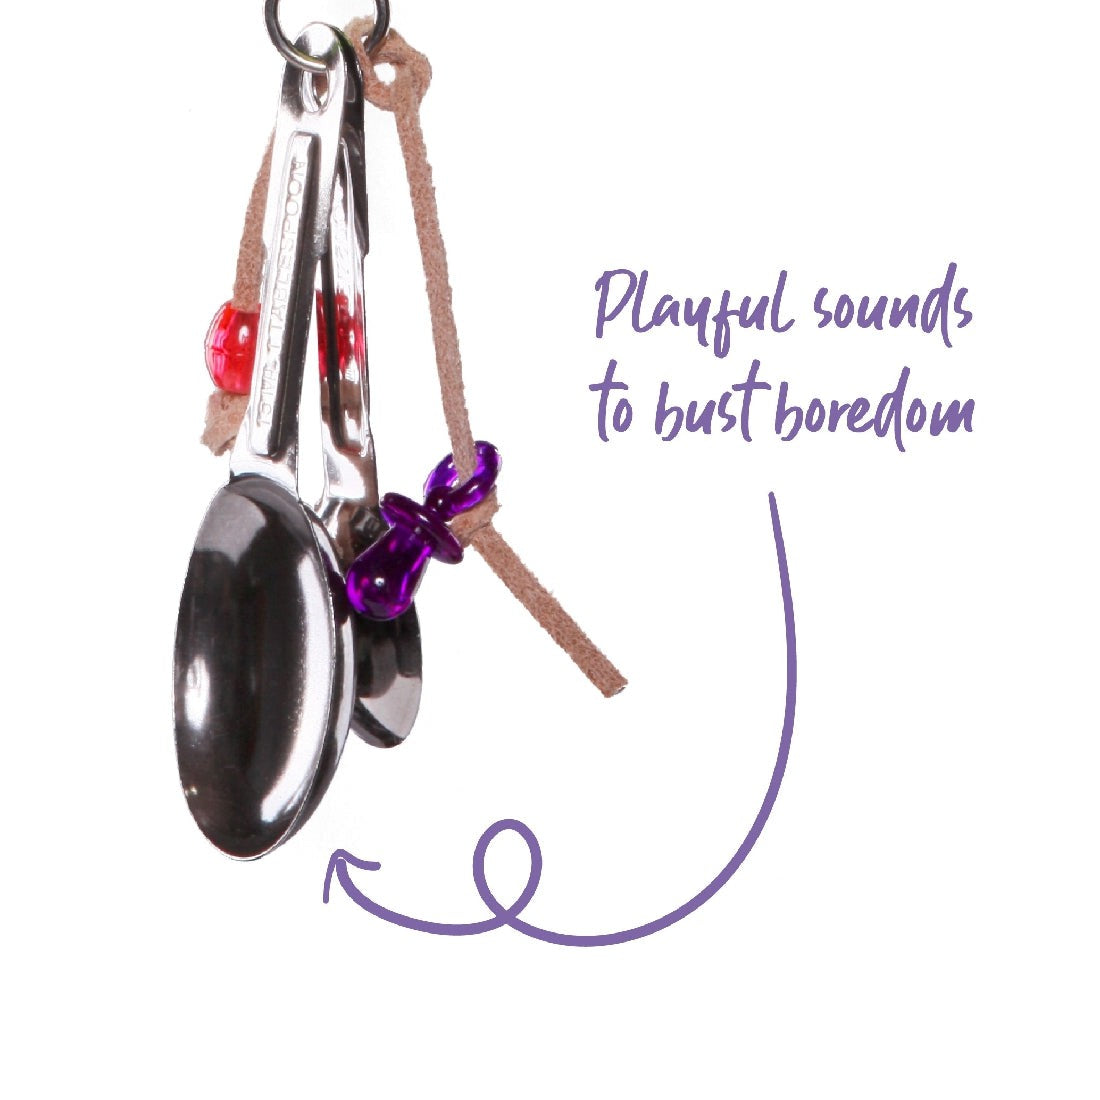 "Metallic bird toy with beads and leather straps, designed to make noise."